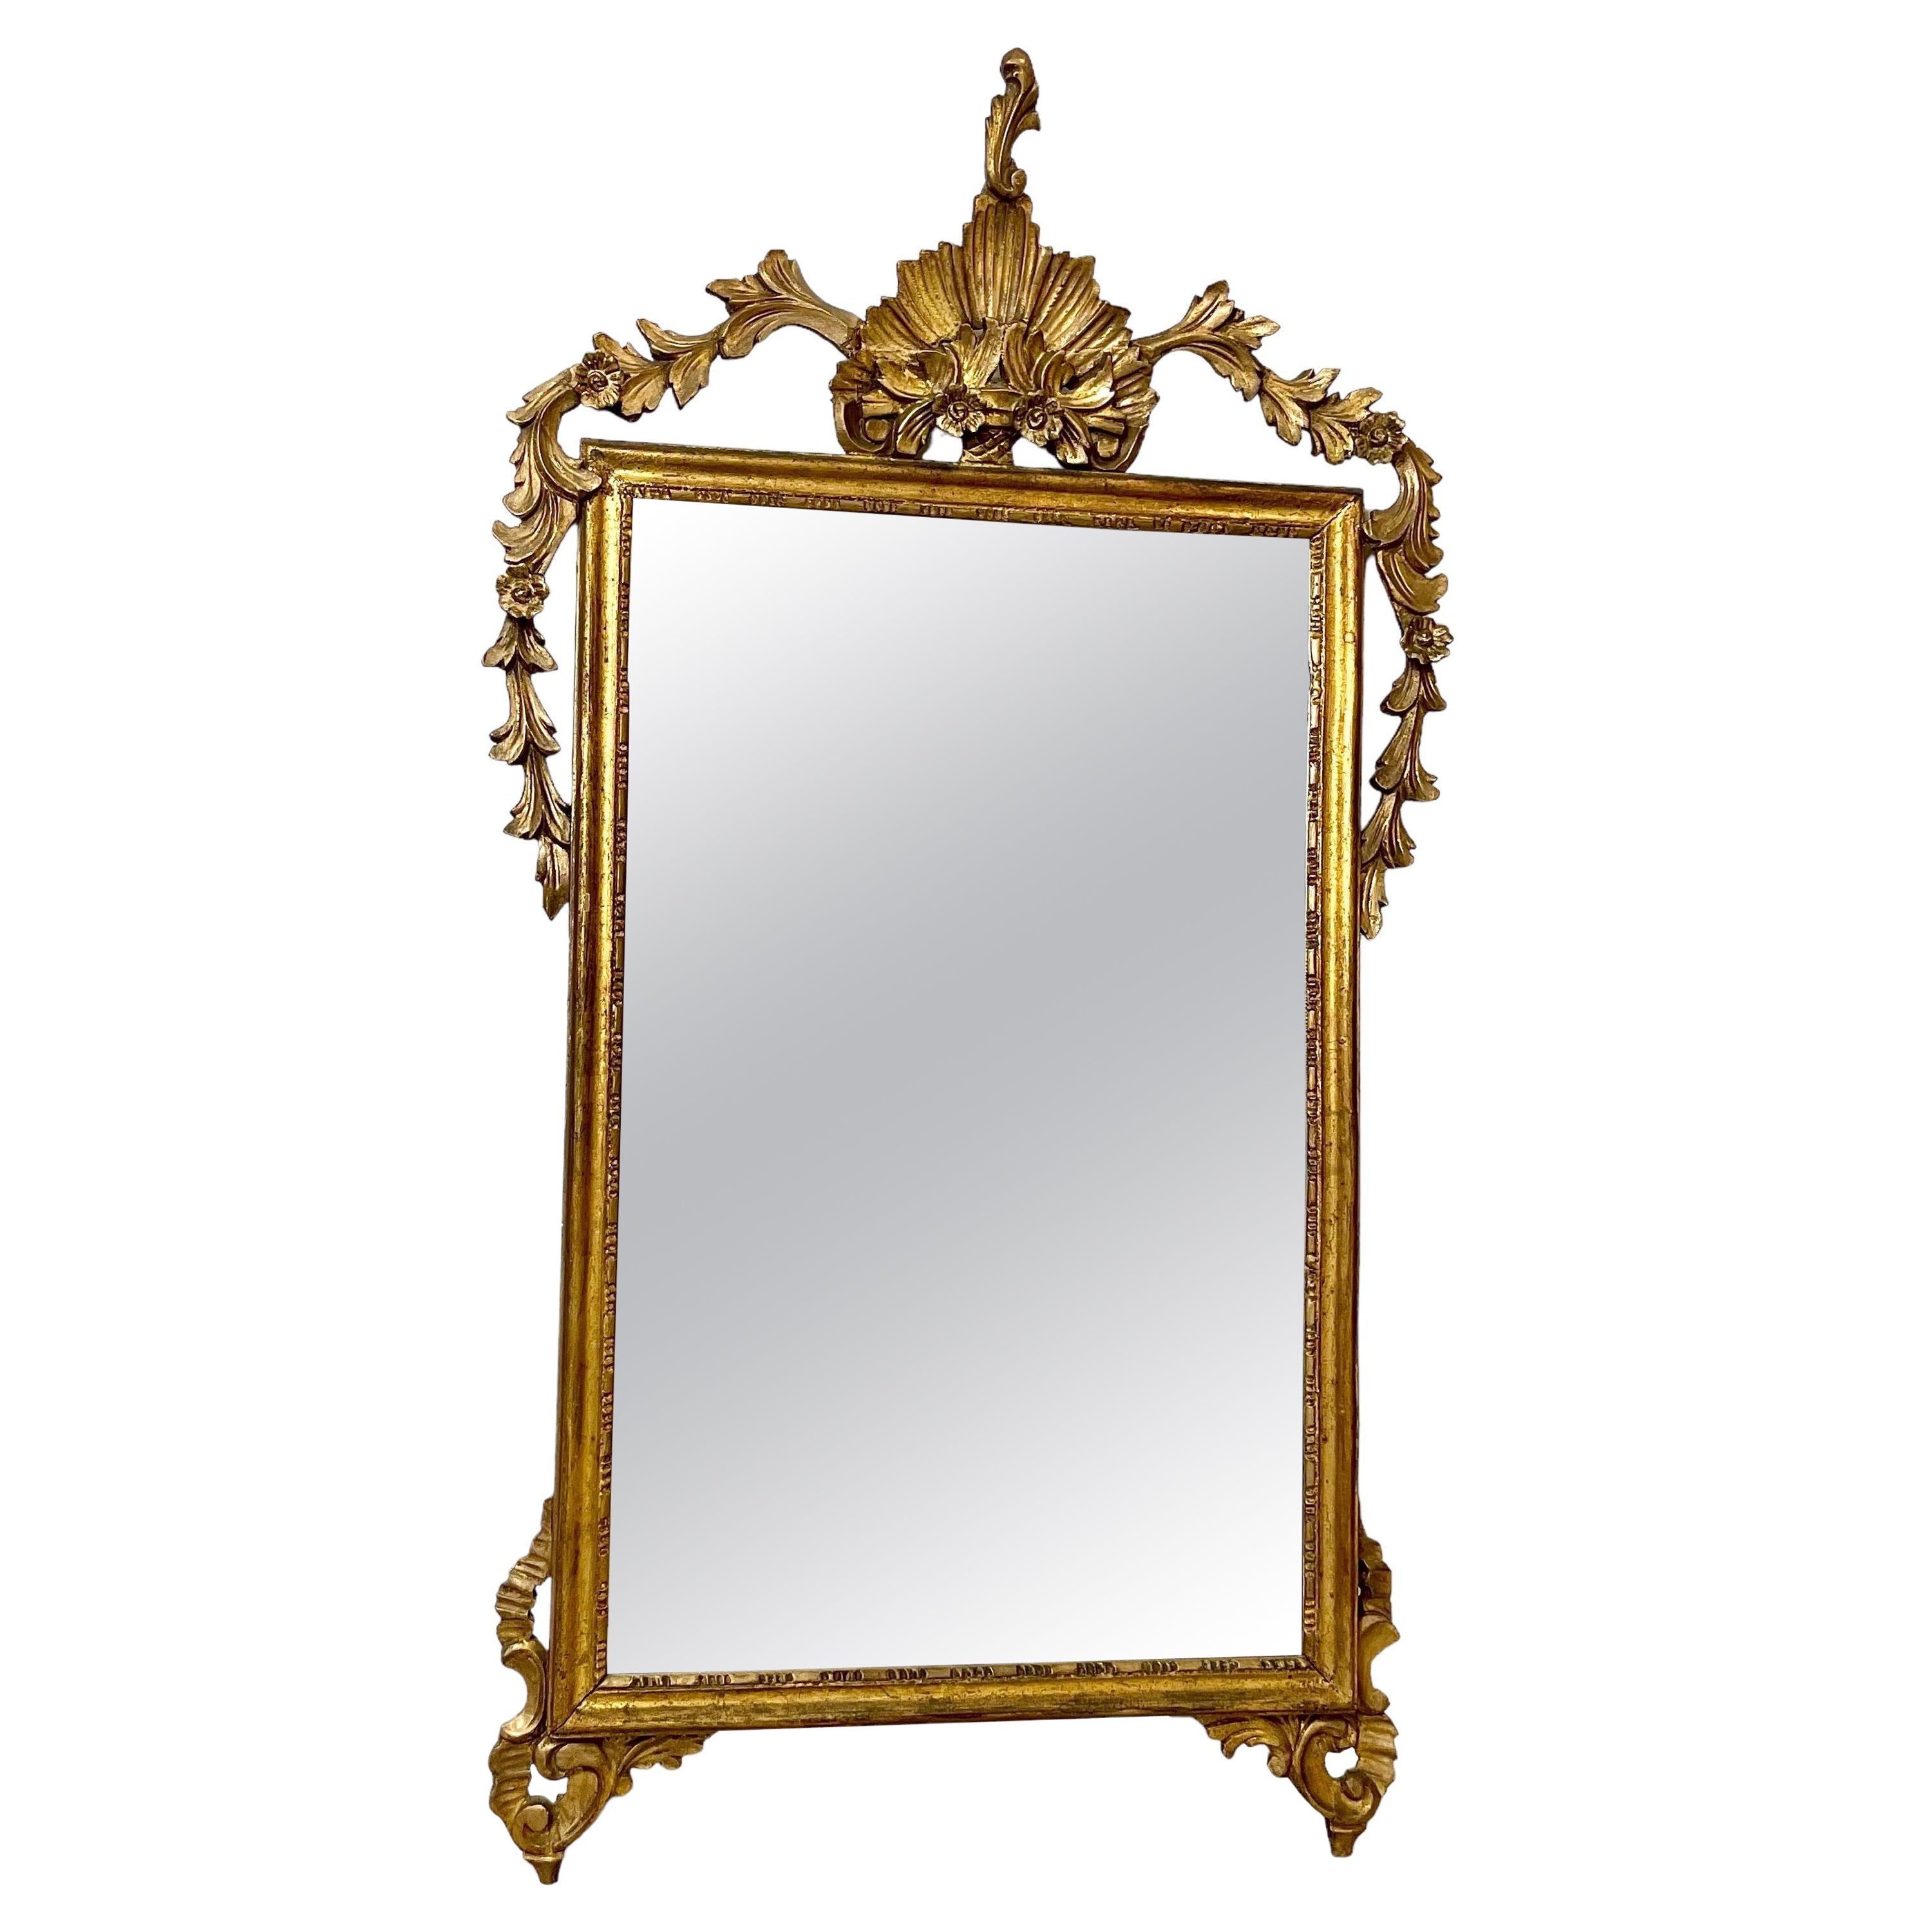 19th Century Giltwood Mantle Mirror with Ornate Crest